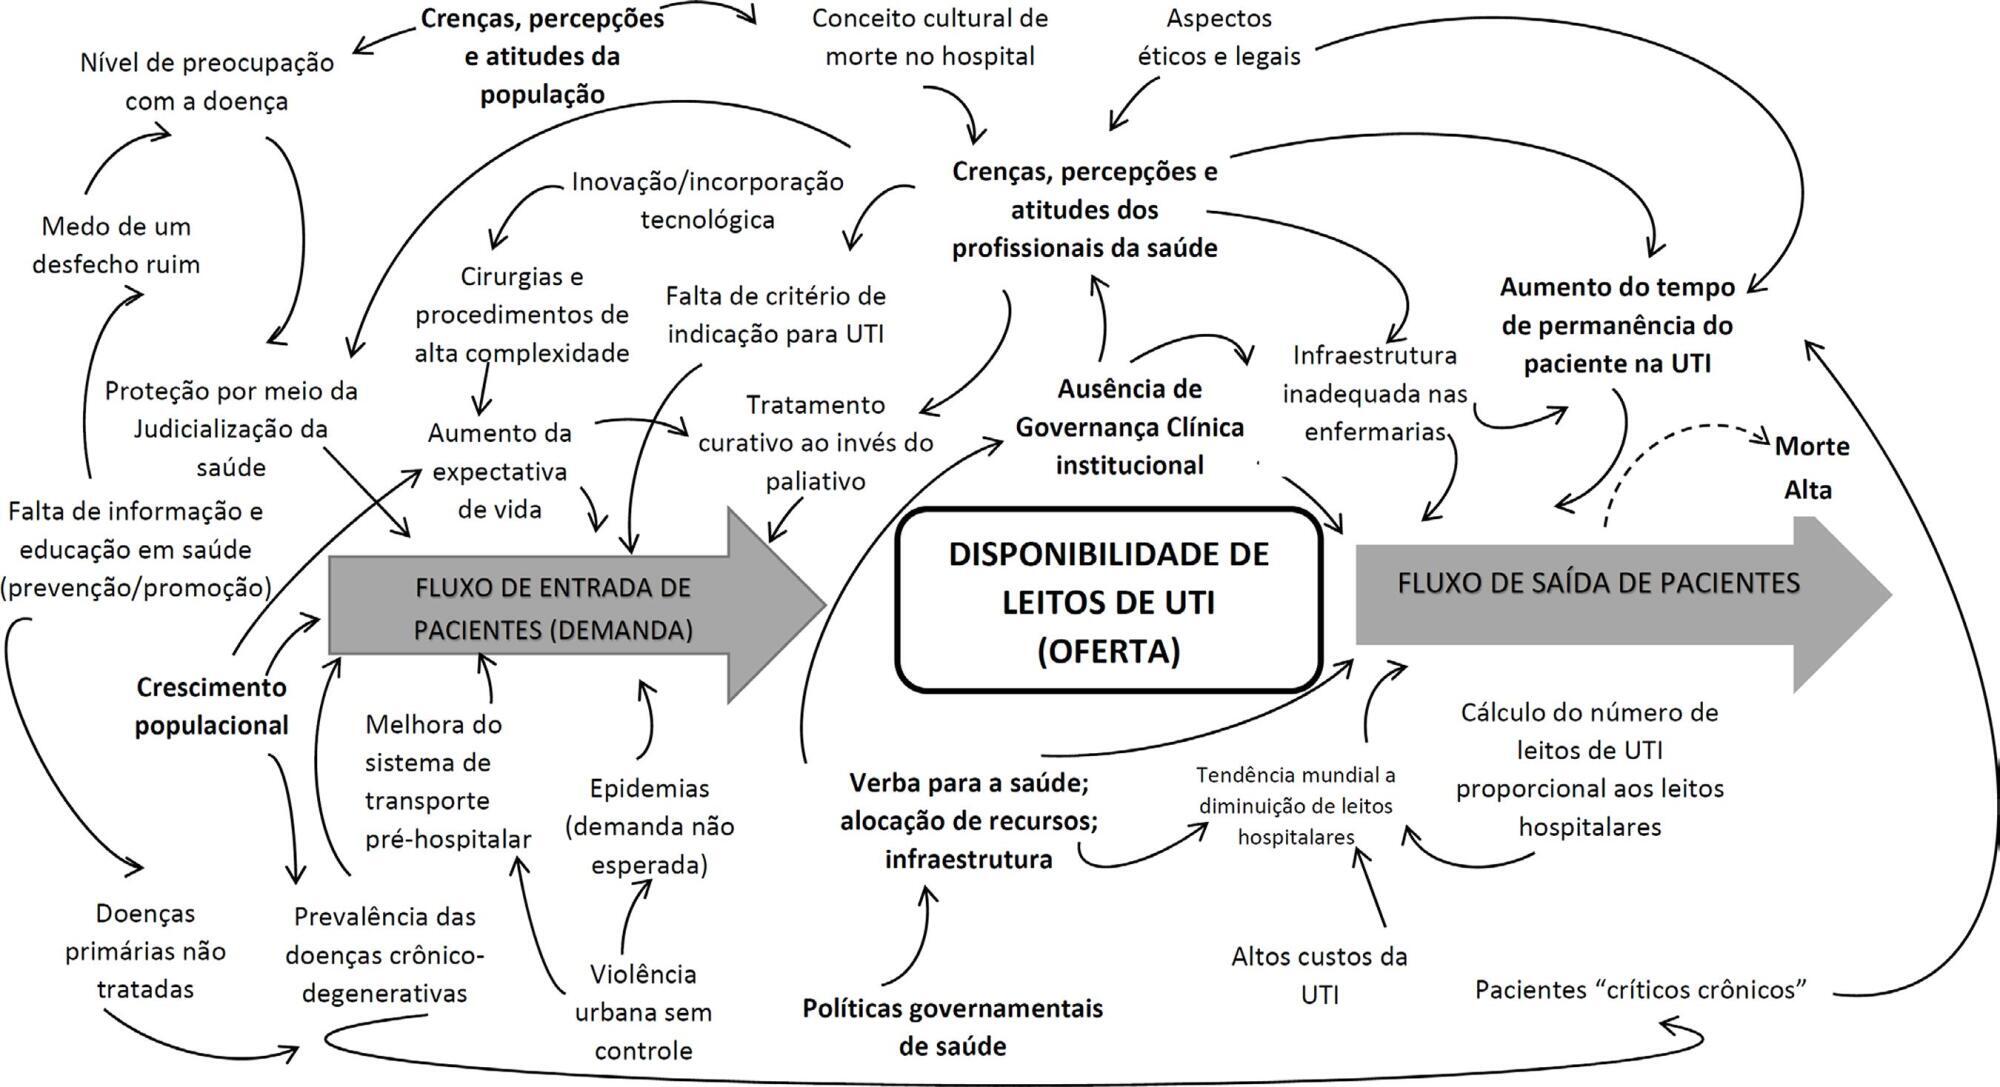 Planning and understanding the intensive care network in the State of Rio de Janeiro (RJ), Brazil: a complex societal problem